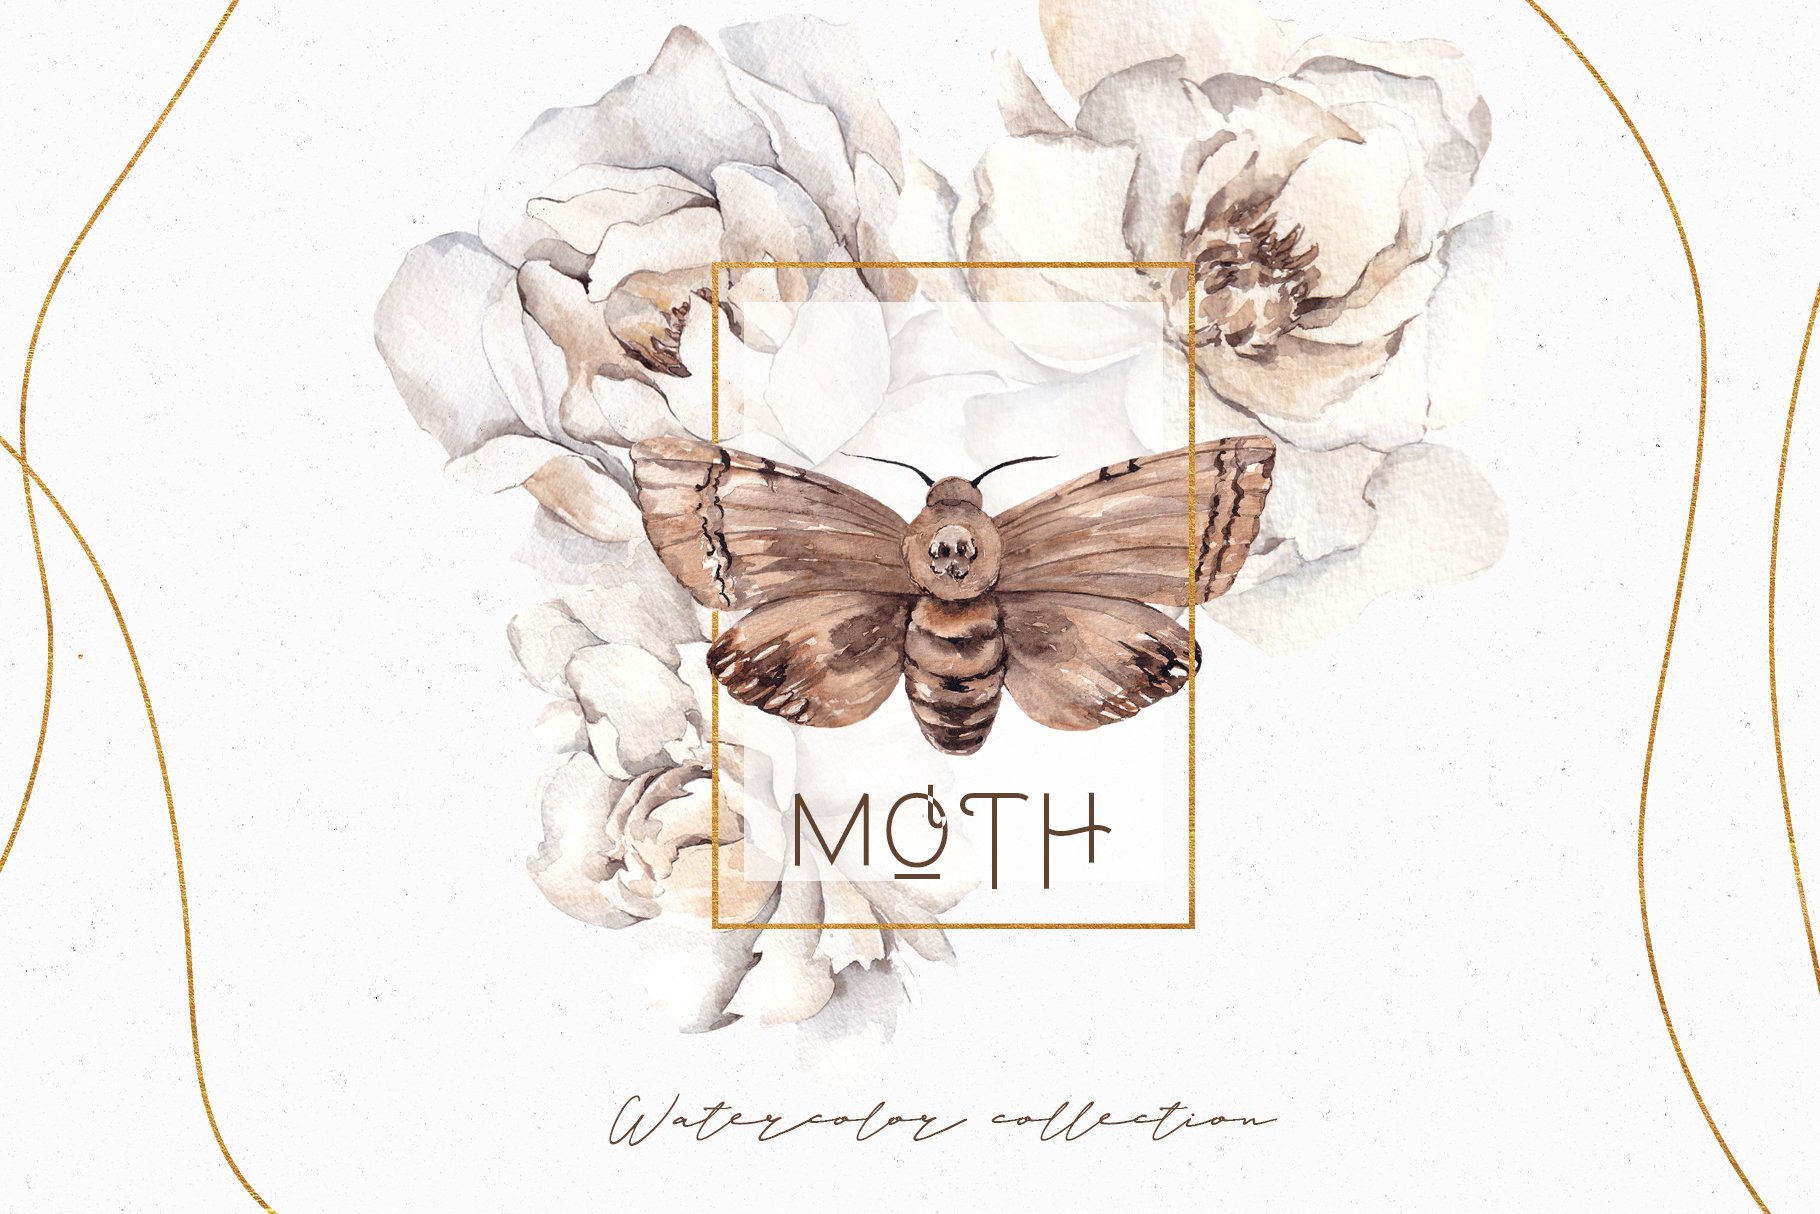 Moth. Watercolor and graphic. cover image.